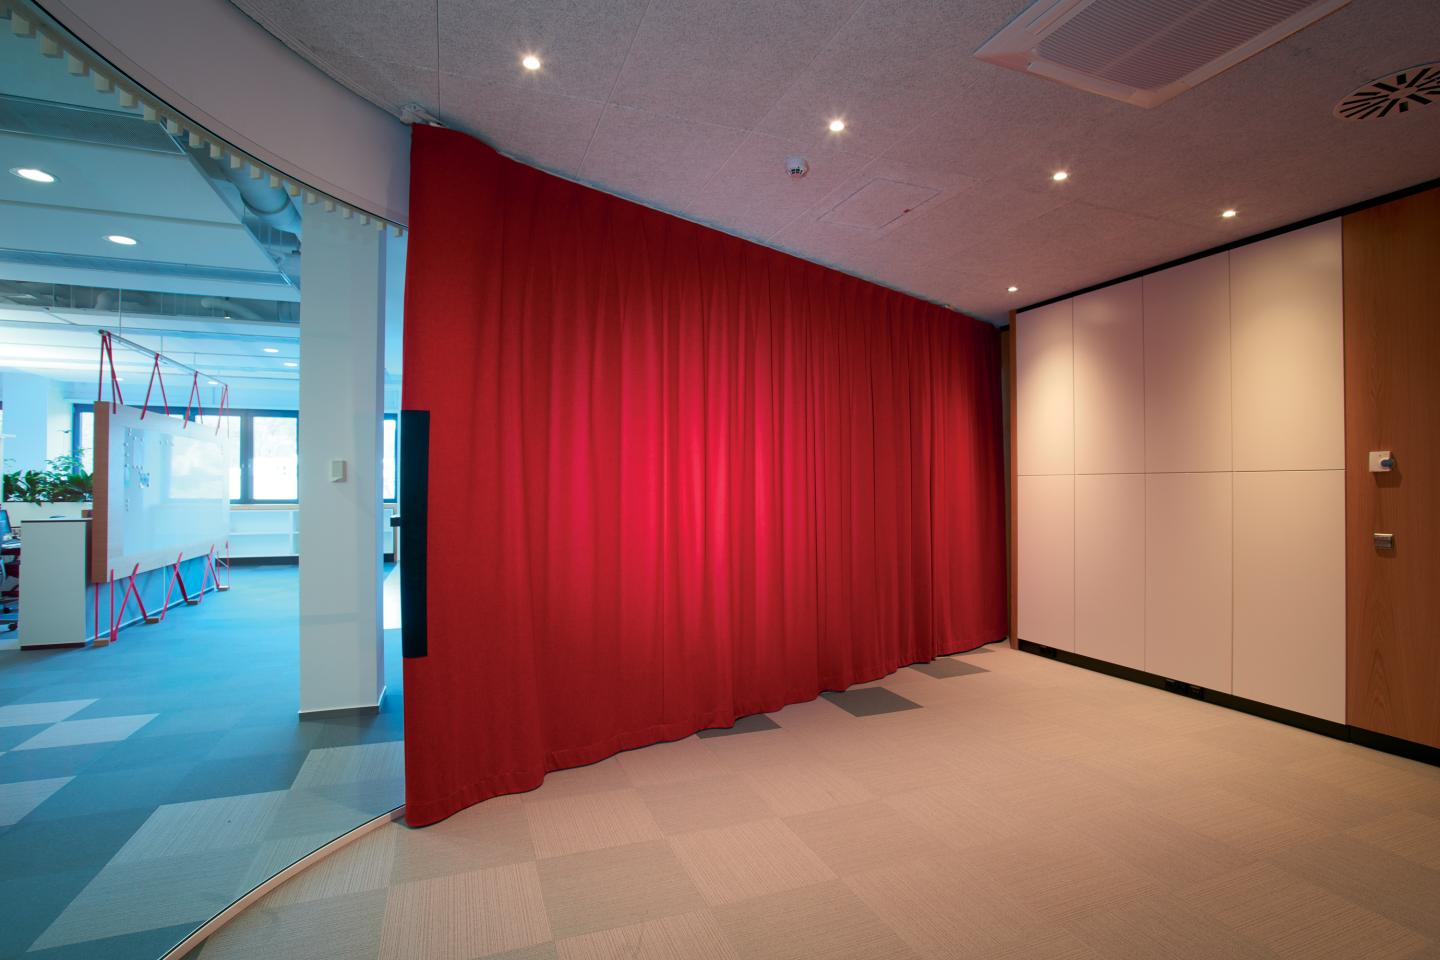 Multiple Sound Curtains Have Been Used at the Headquarter of the German Company Häfele